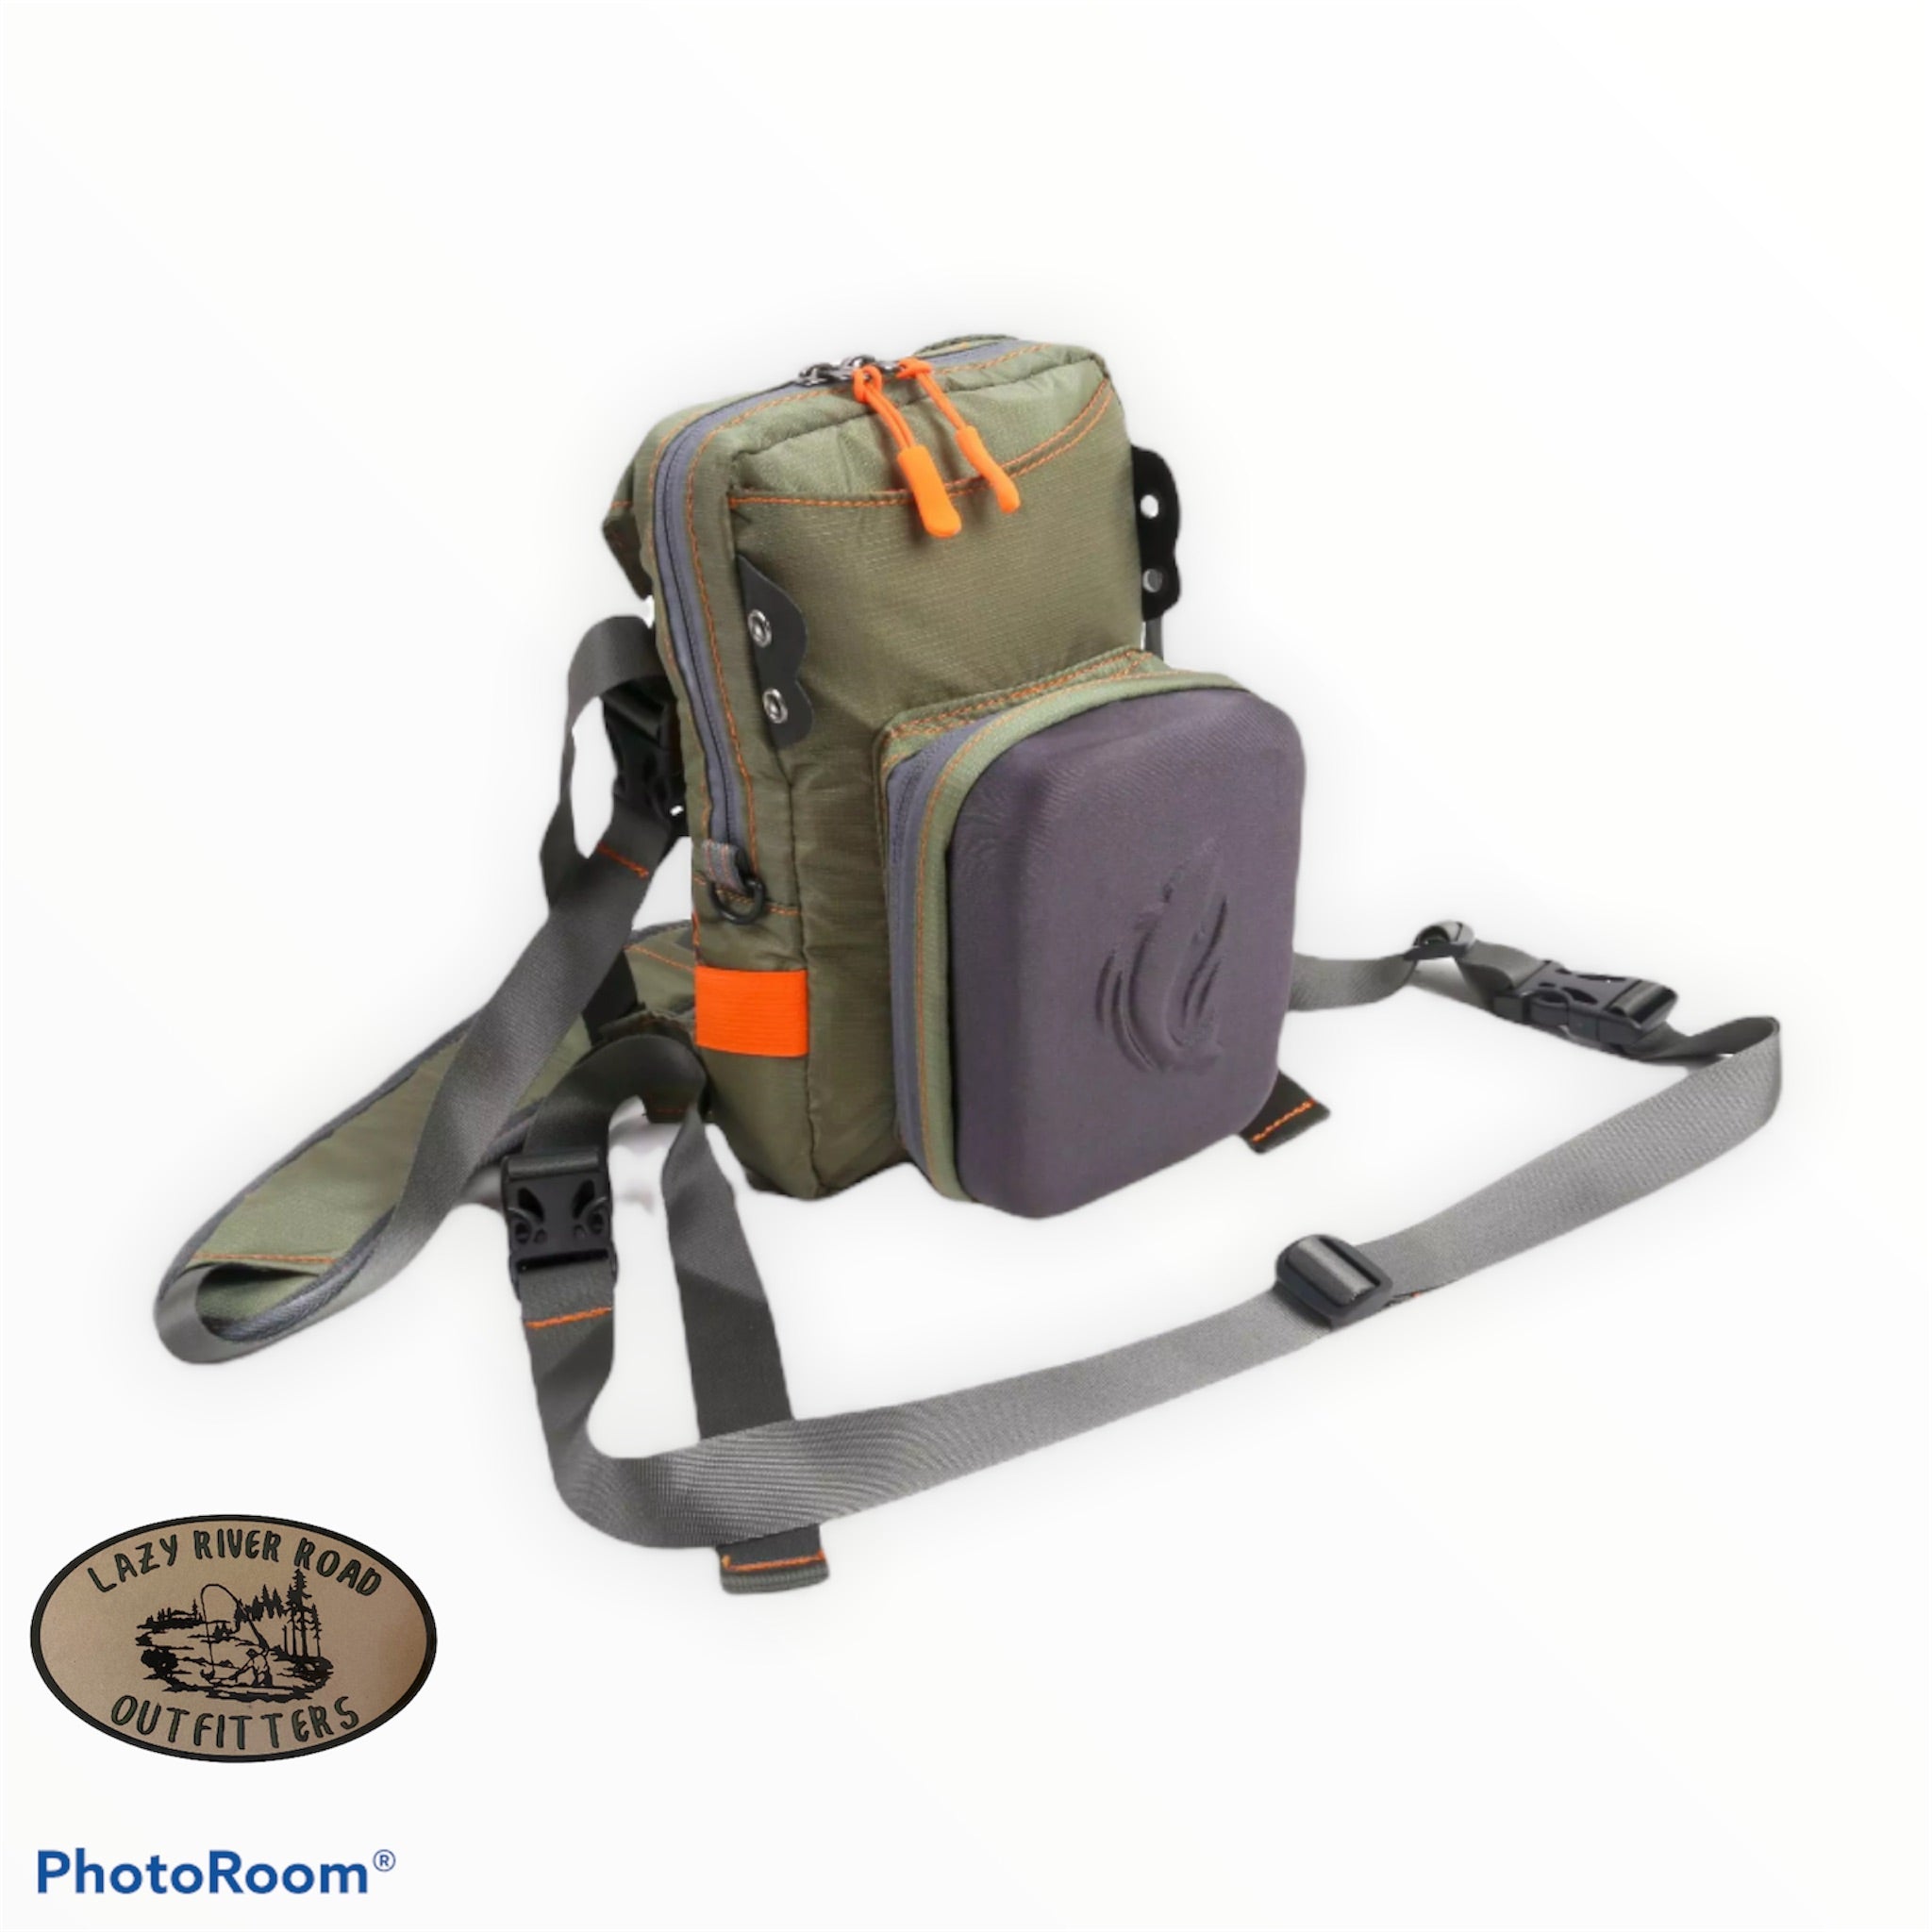 Chest pack – Lazy river road outfitters